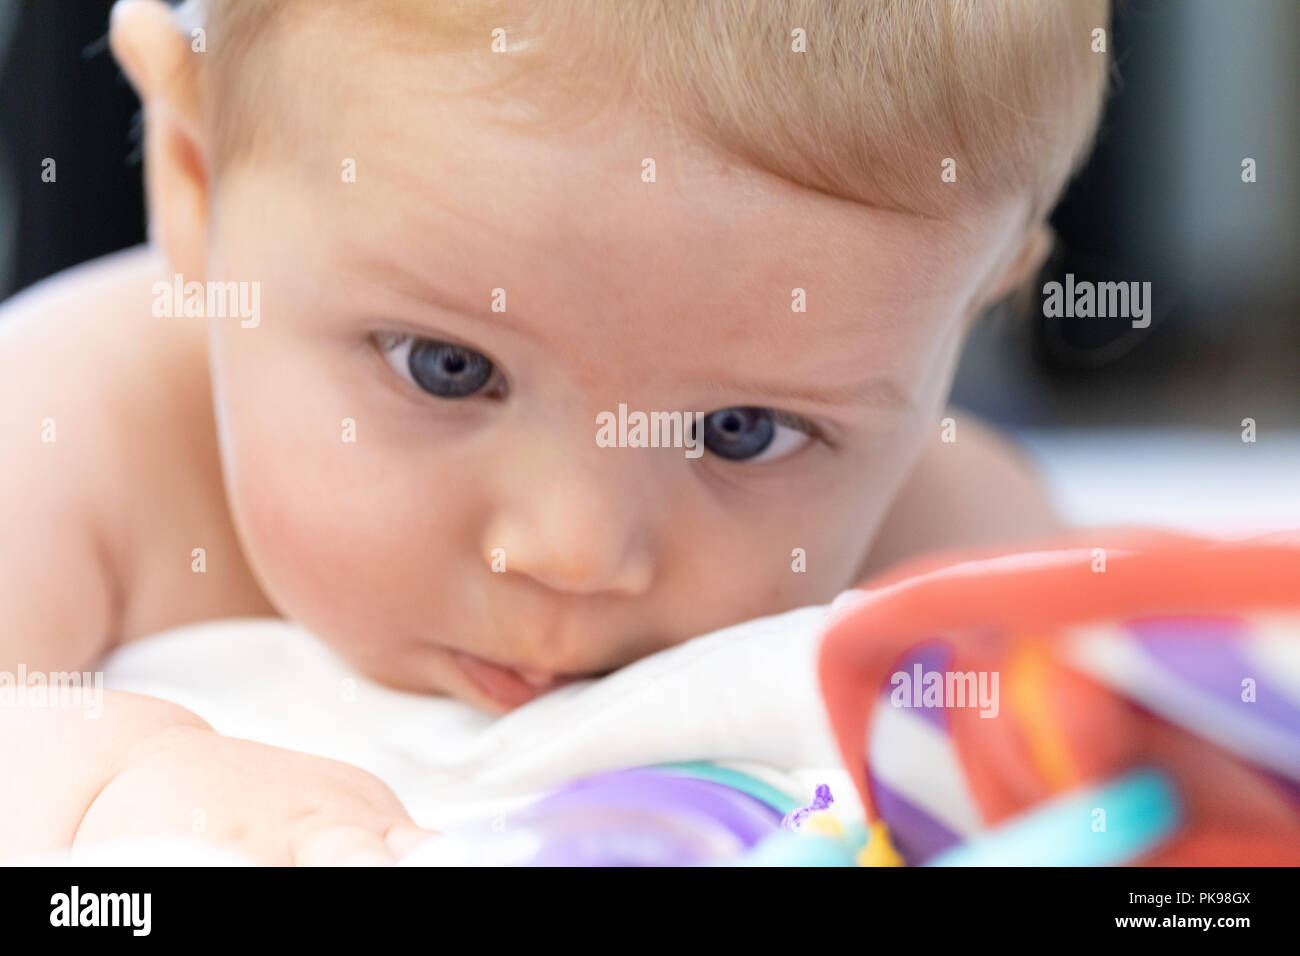 Cute little baby with big blue eyes lying on its stomach on a cot looking at its colorful plastic educational toys Stock Photo